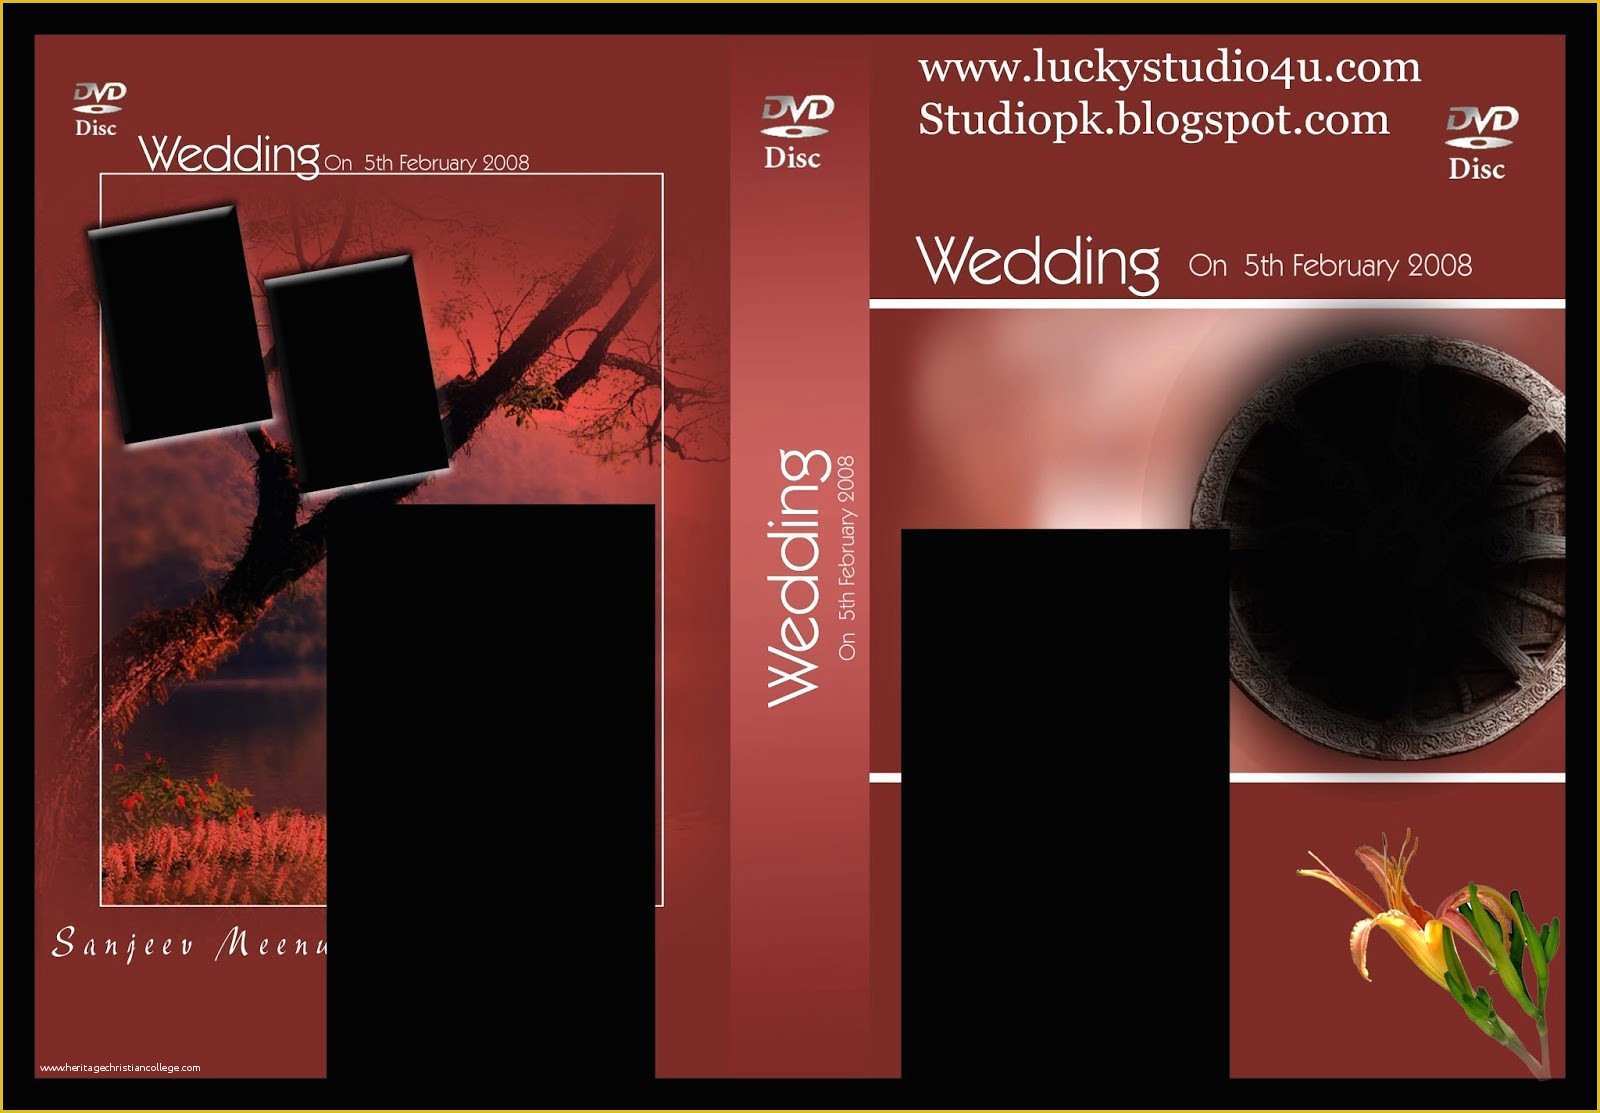 Dvd Template Psd Free Download Of 27 Wedding Dvd Cover Psd Templates Free Download Studiopk